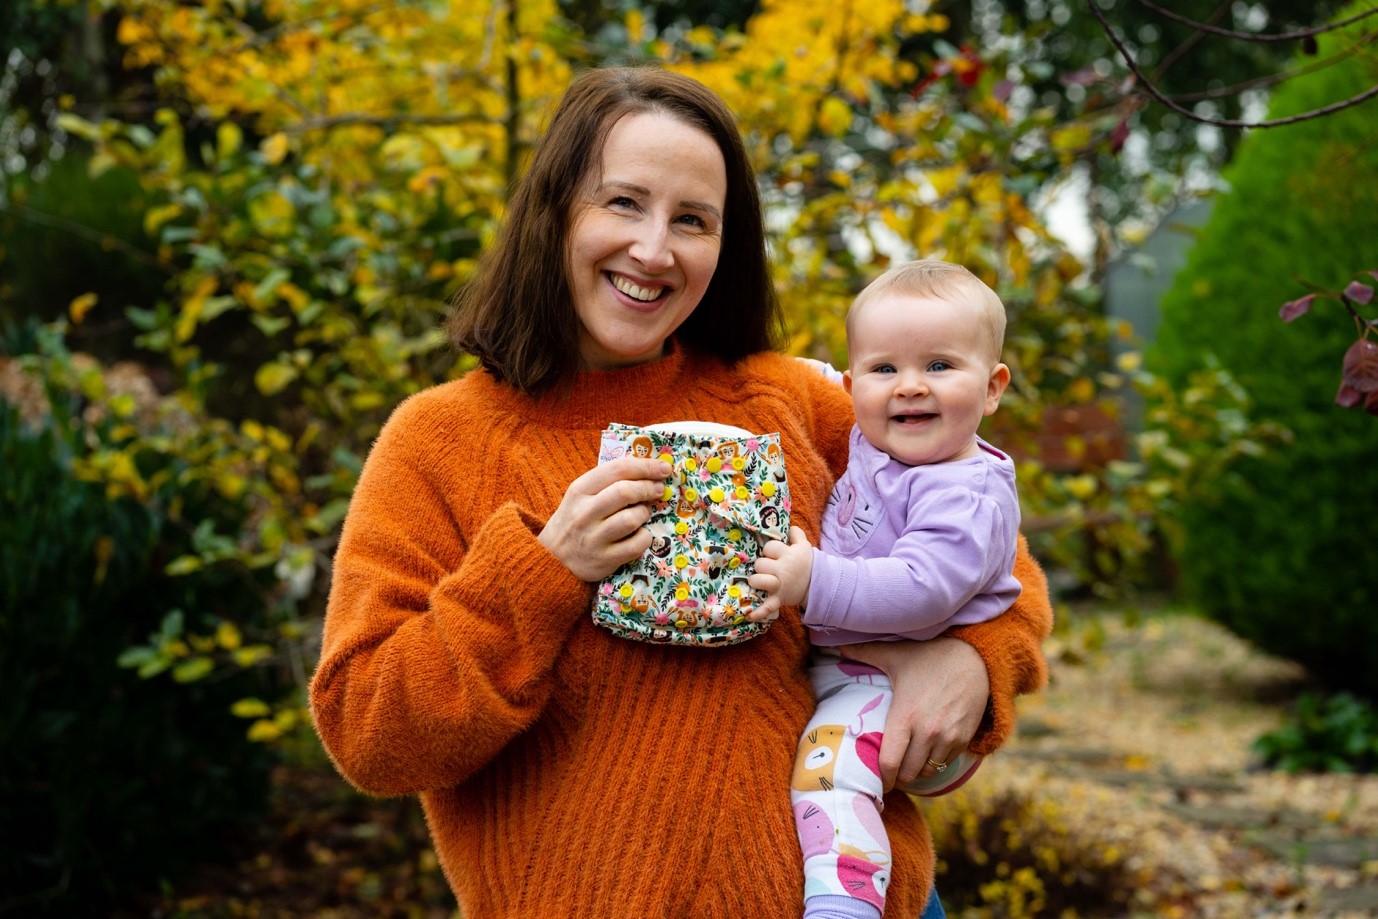 Wexford Mum launches new business to tackle Irelands growing plastic waste problem